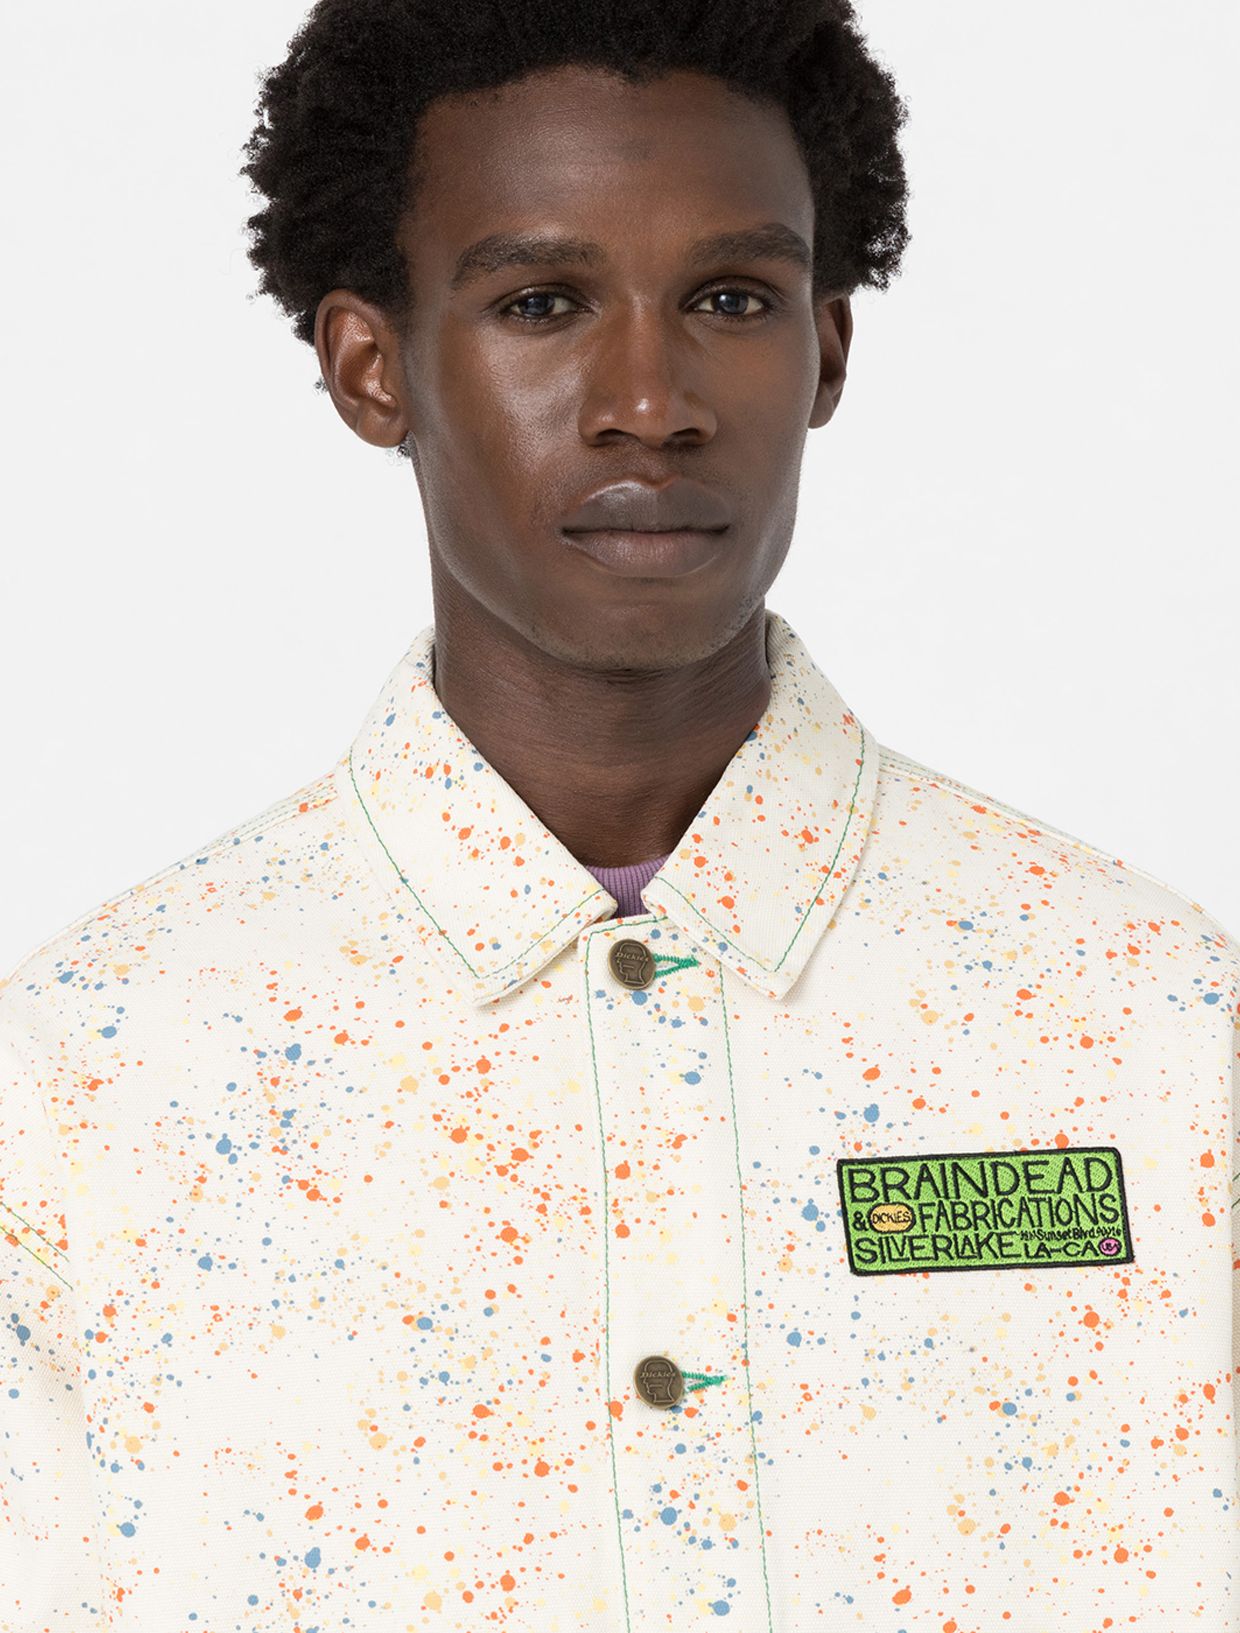 Brain Dead and Dickies Bring an Artful Approach to Workwear